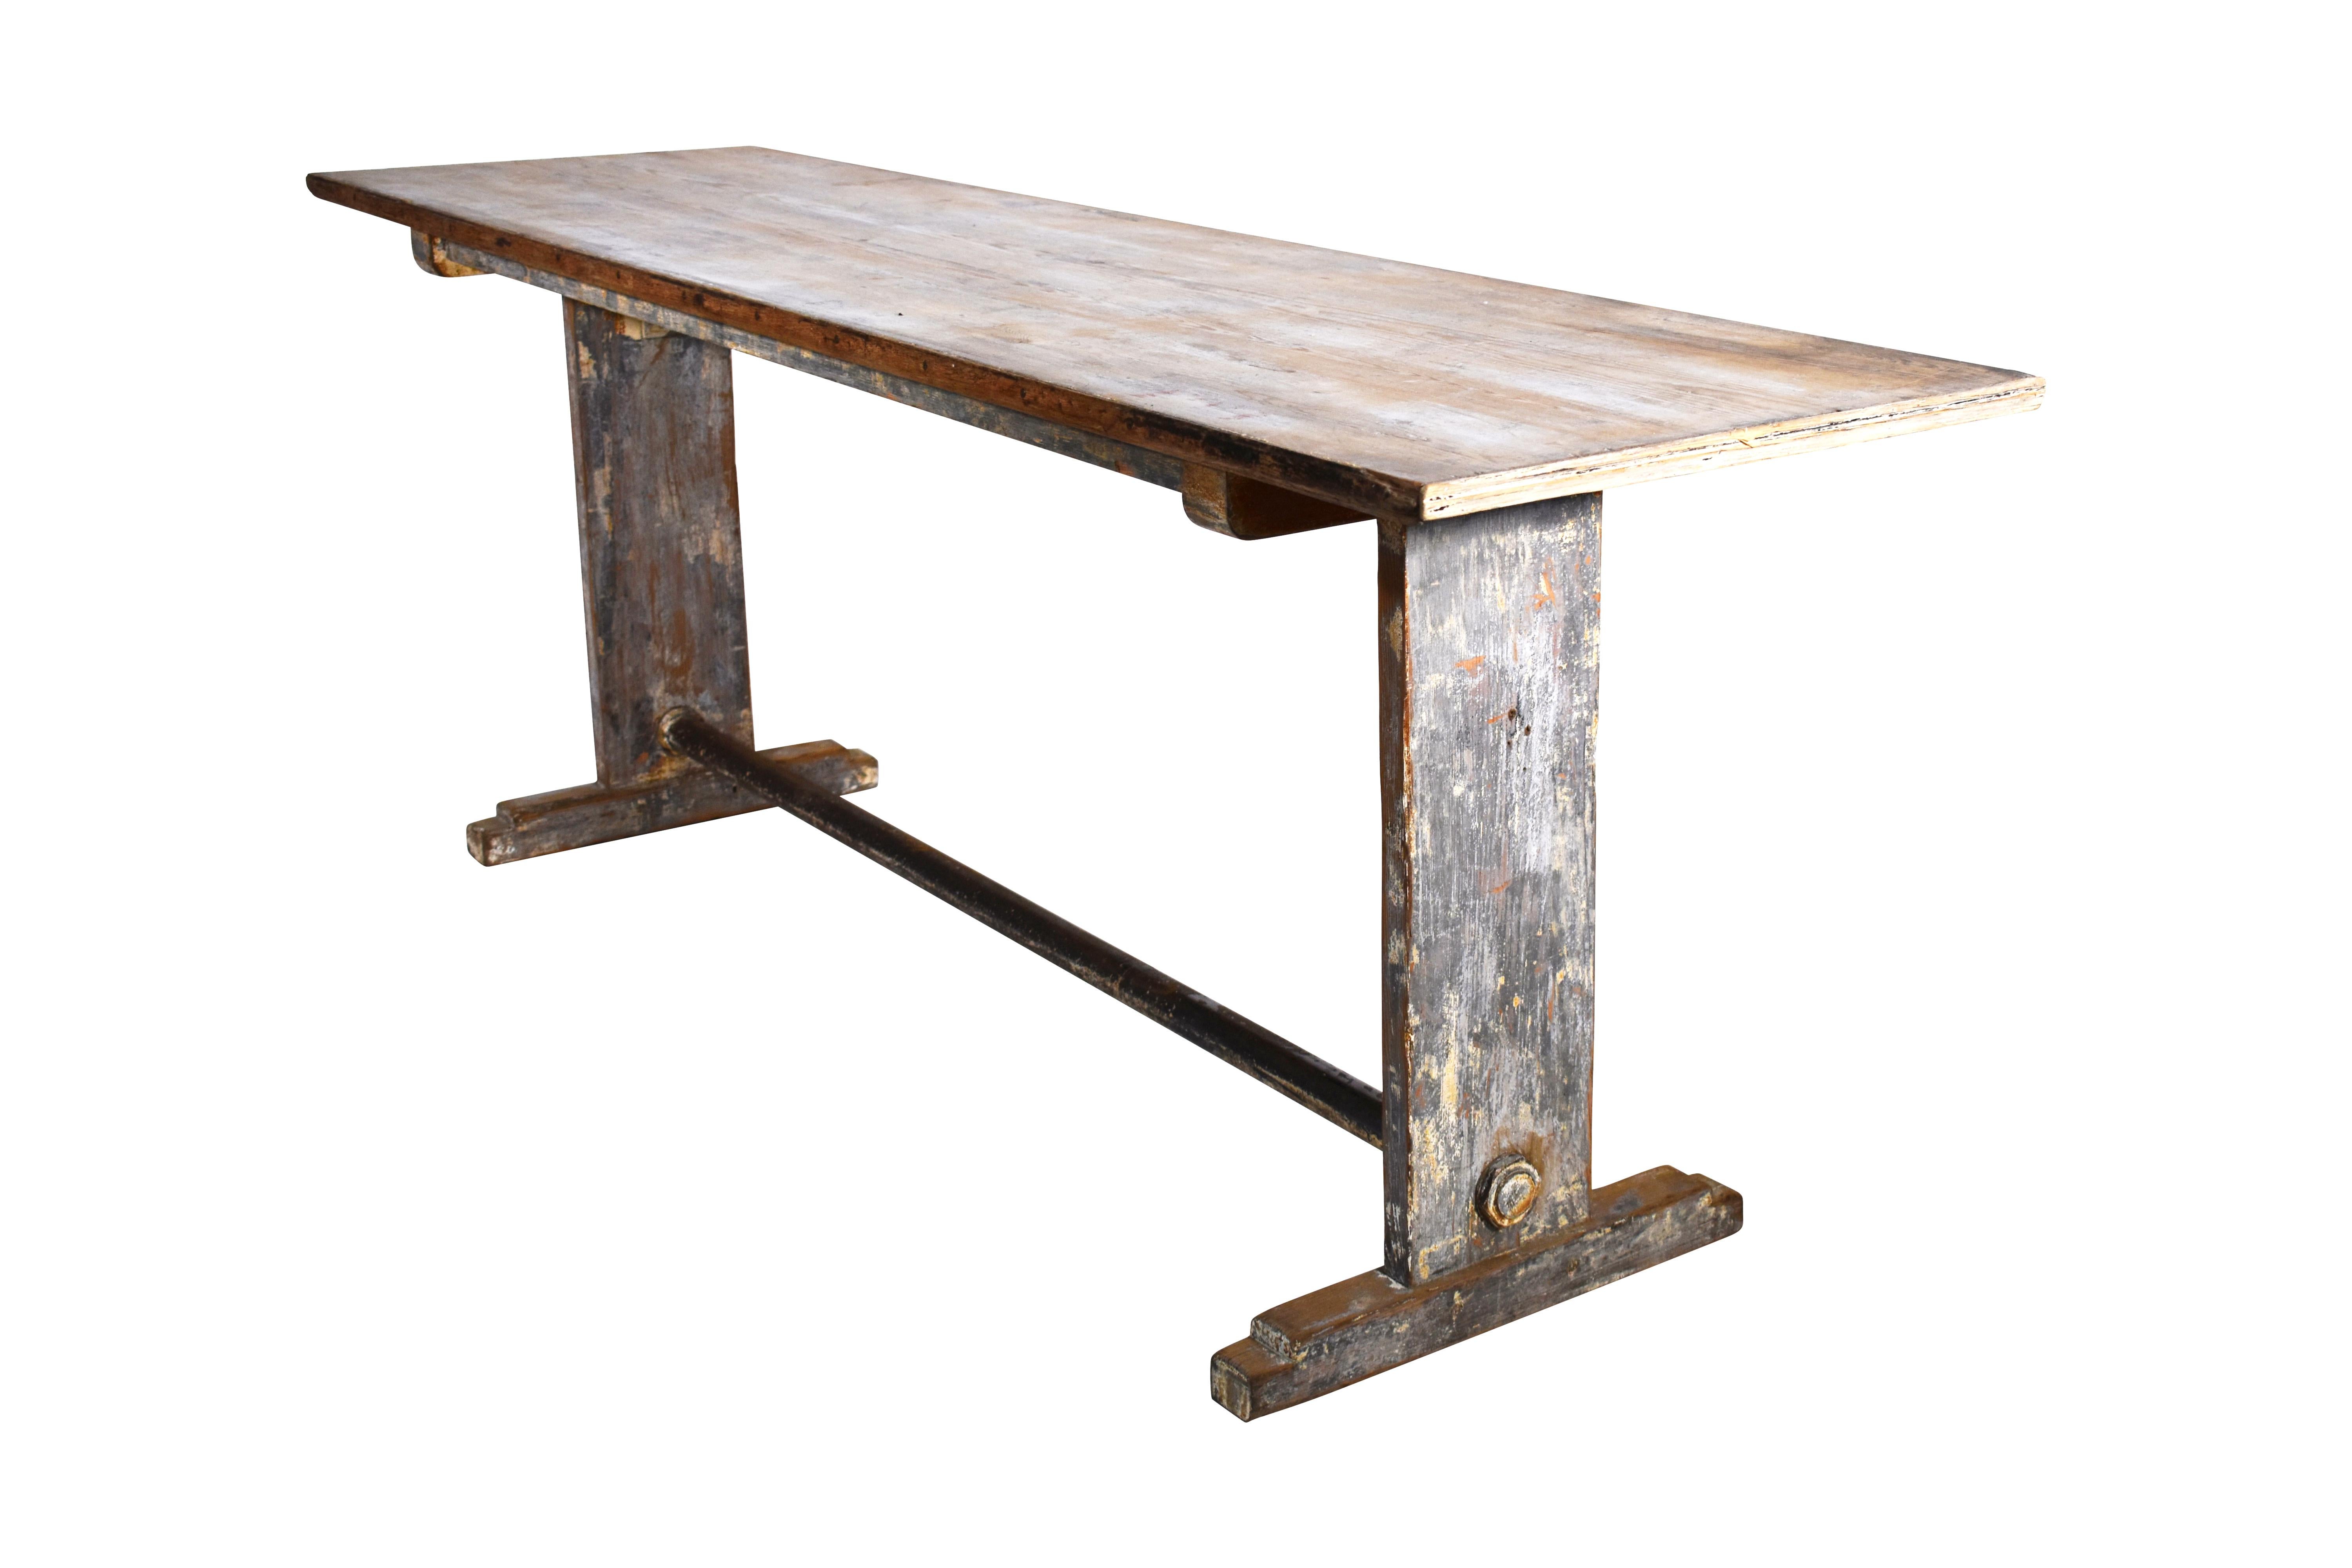 The weathered patina on this vintage dining or bistro table is white with traces of blue. It is perfect in a modern setting with contemporary chairs for dining (Iron Stretcher included) or as a desk with European character, circa 1920-1950.